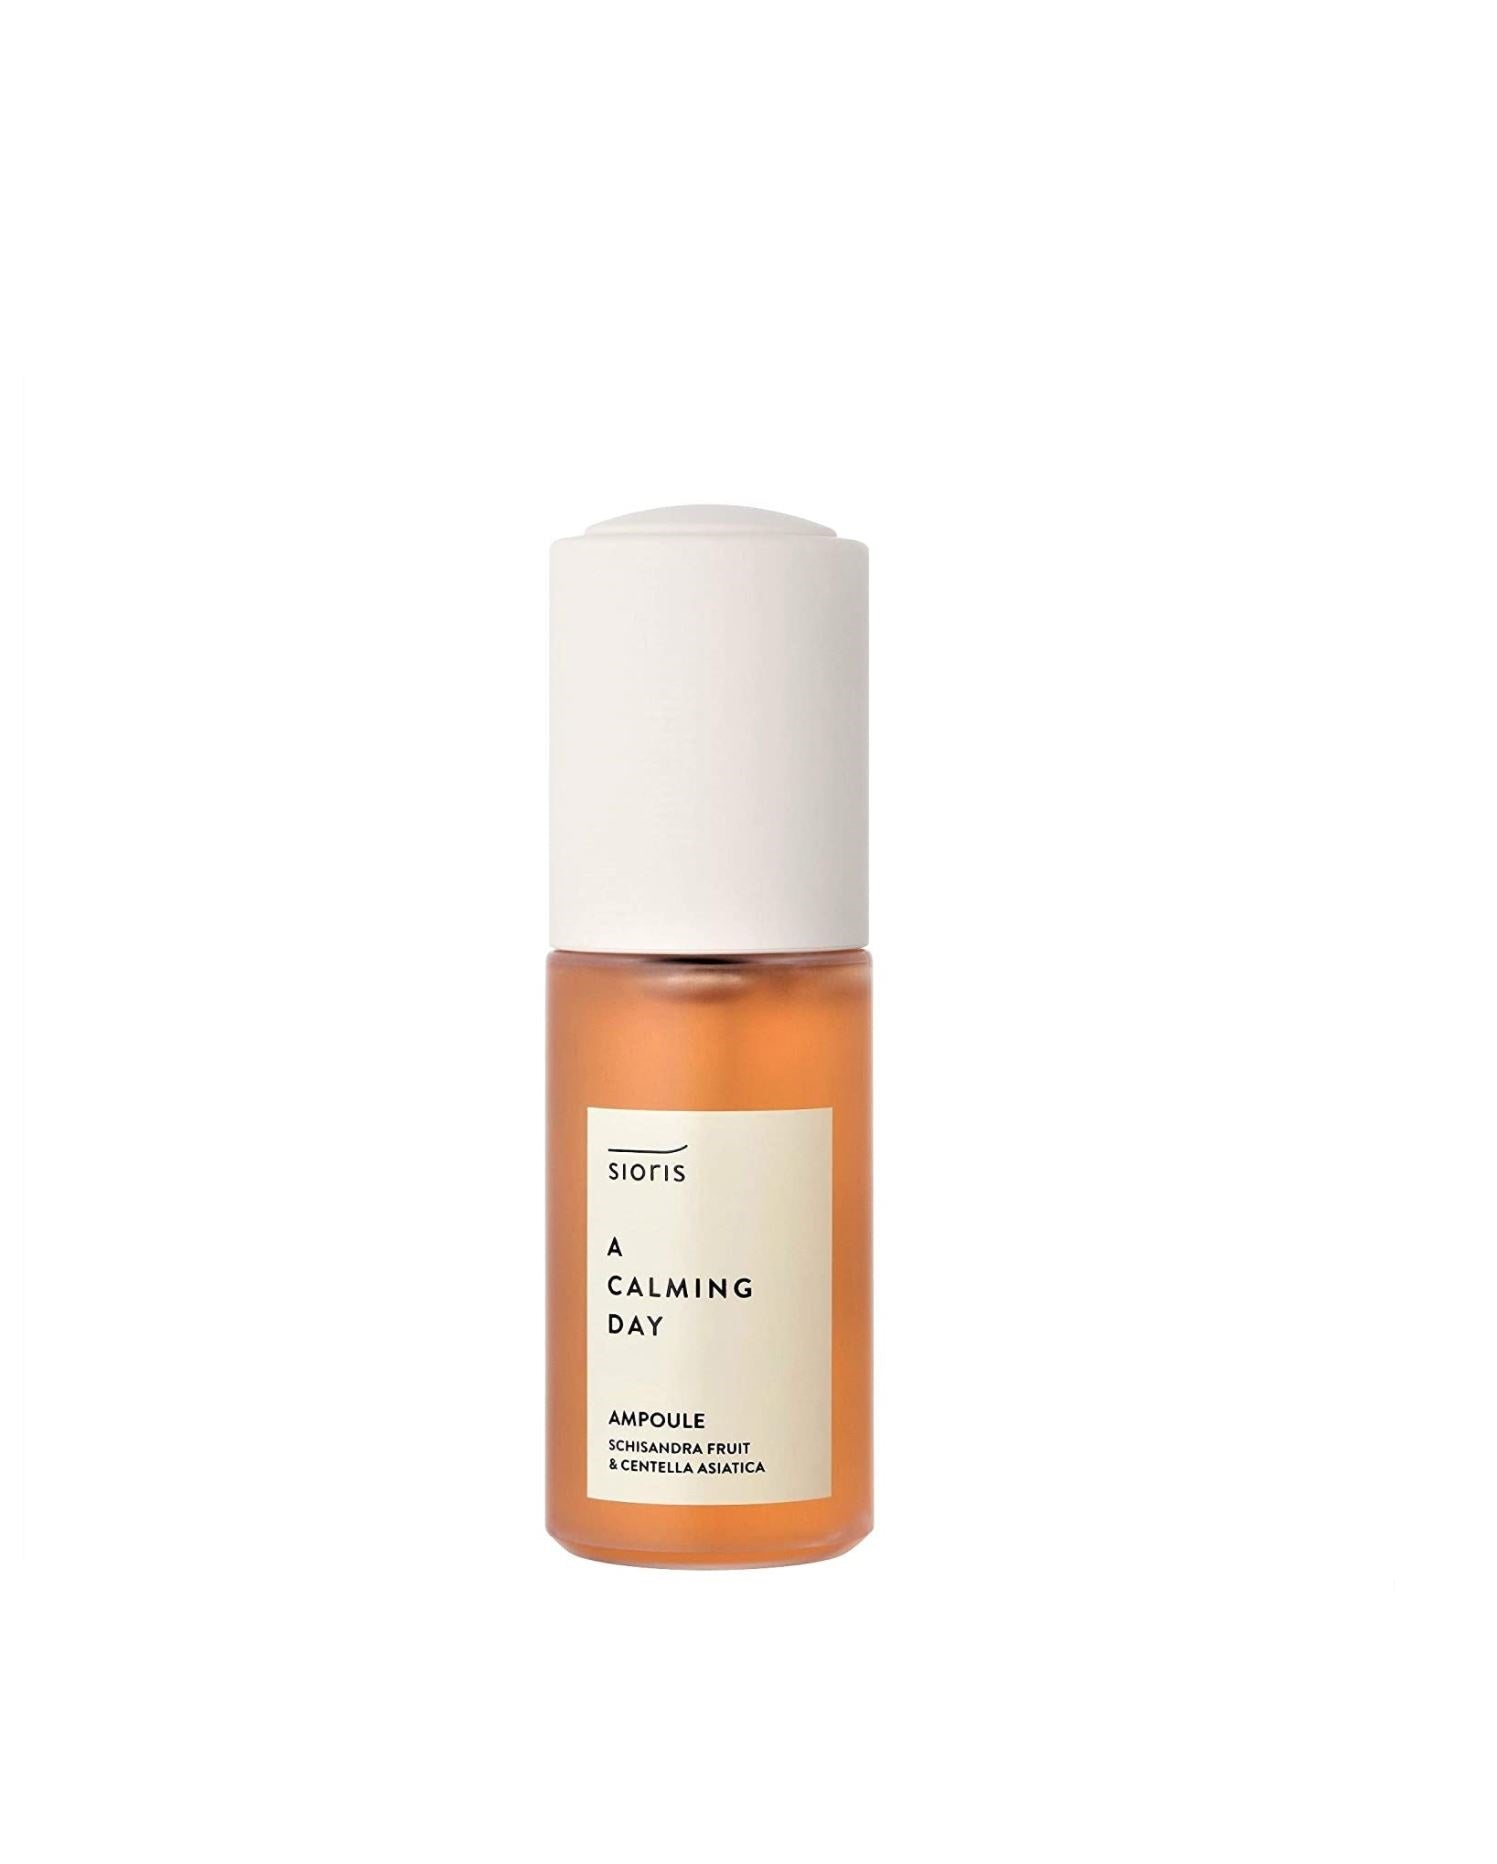 Sioris A calming day Ampoule 35ml